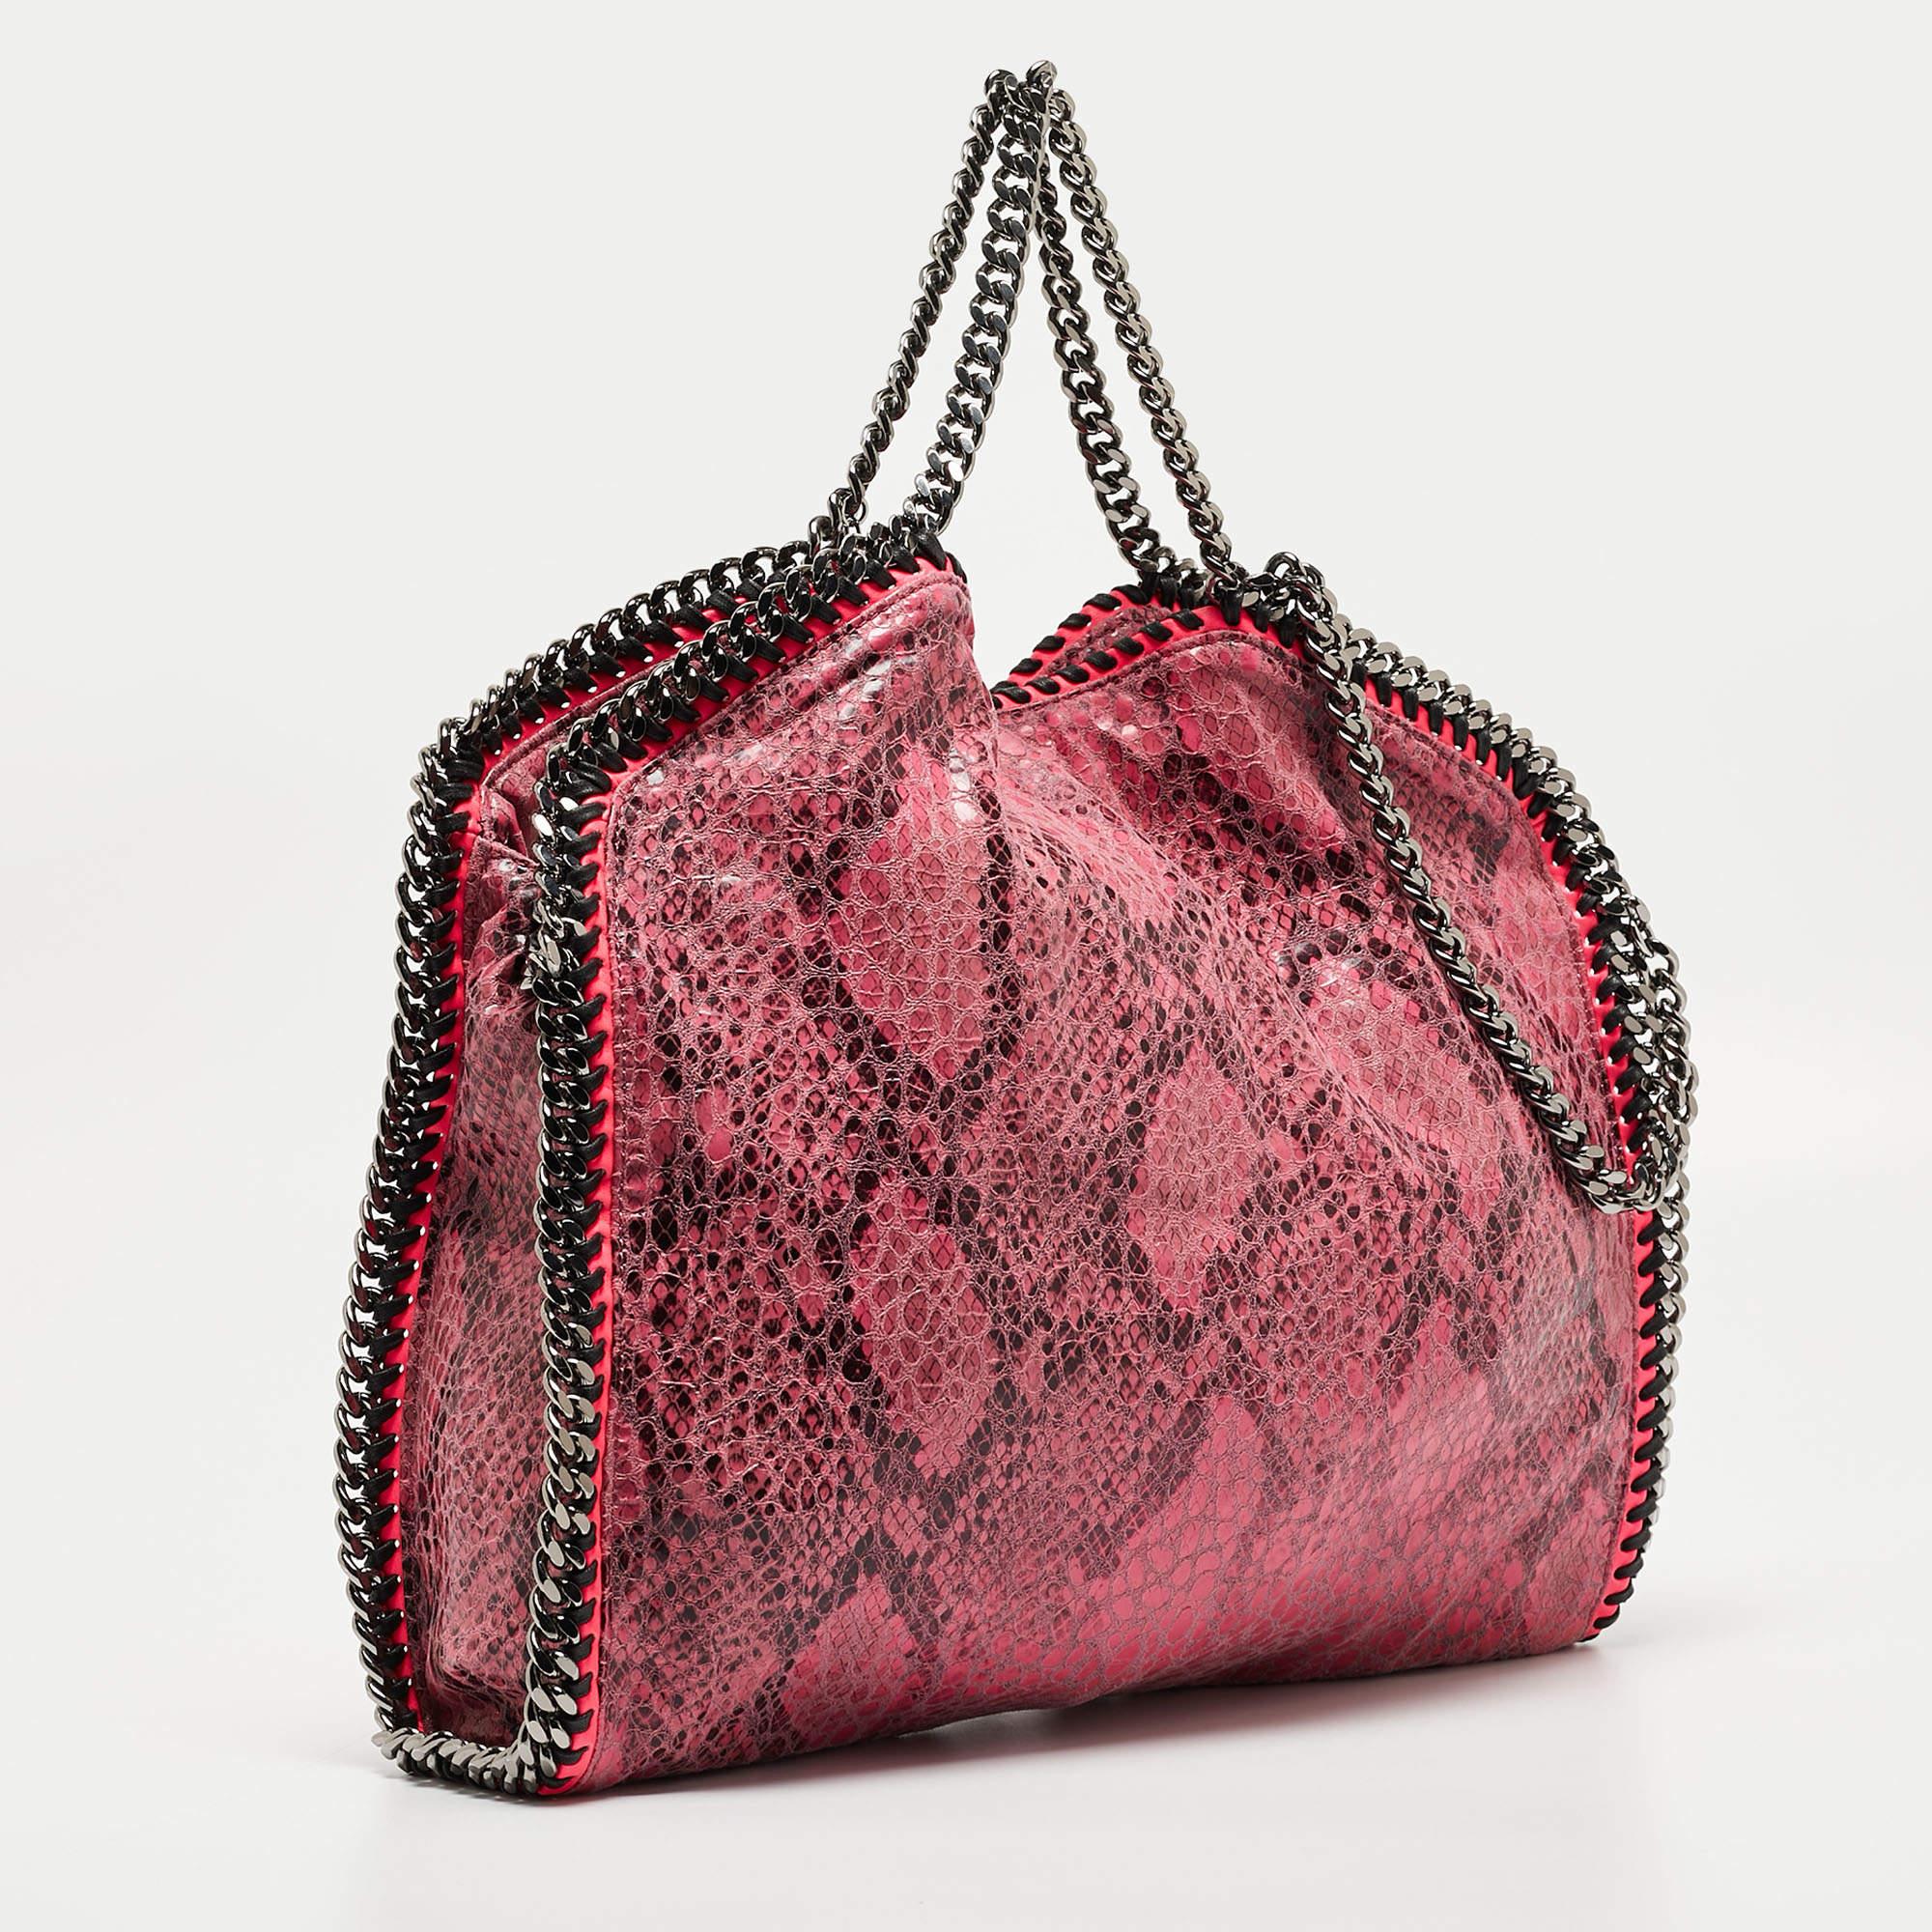 This Falabella bag from Stella McCartney is a beauty. Crafted from faux python leather, it is durable and stylish. While the chain detailing elevates its beauty, the lined interior will dutifully hold all your daily essentials.

